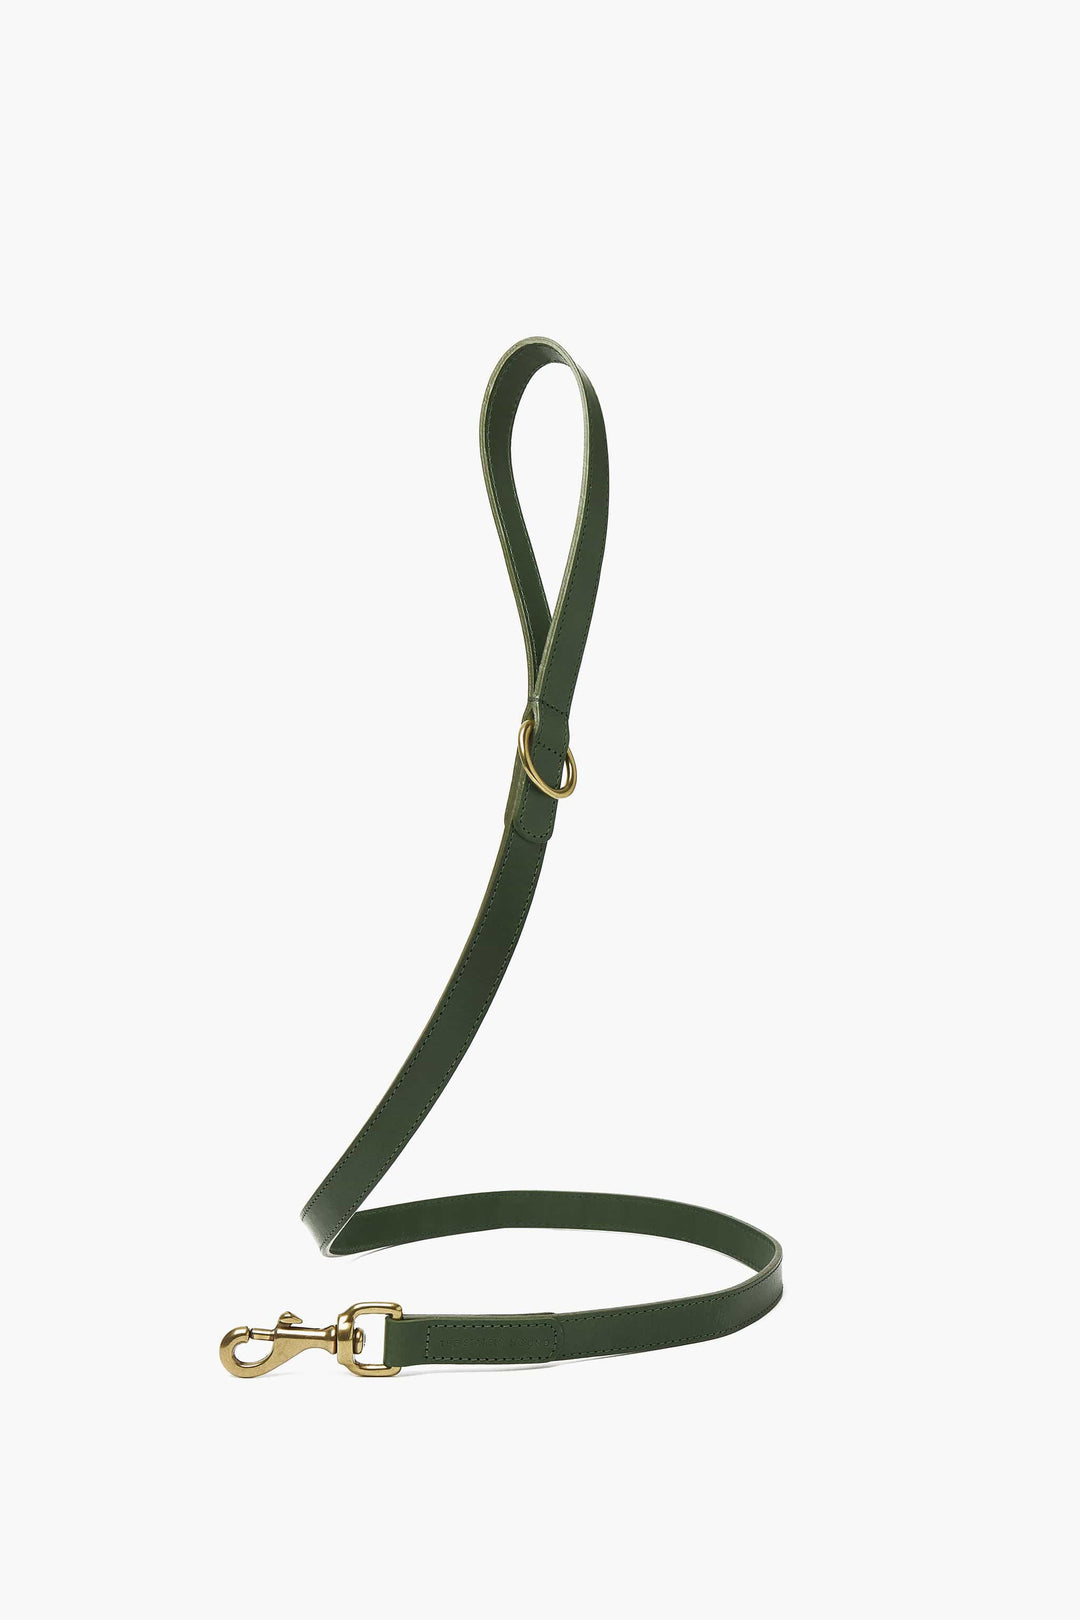 Hand-Stitched Premium Leather Dog Lead in Avocado Green with Brass Hardware